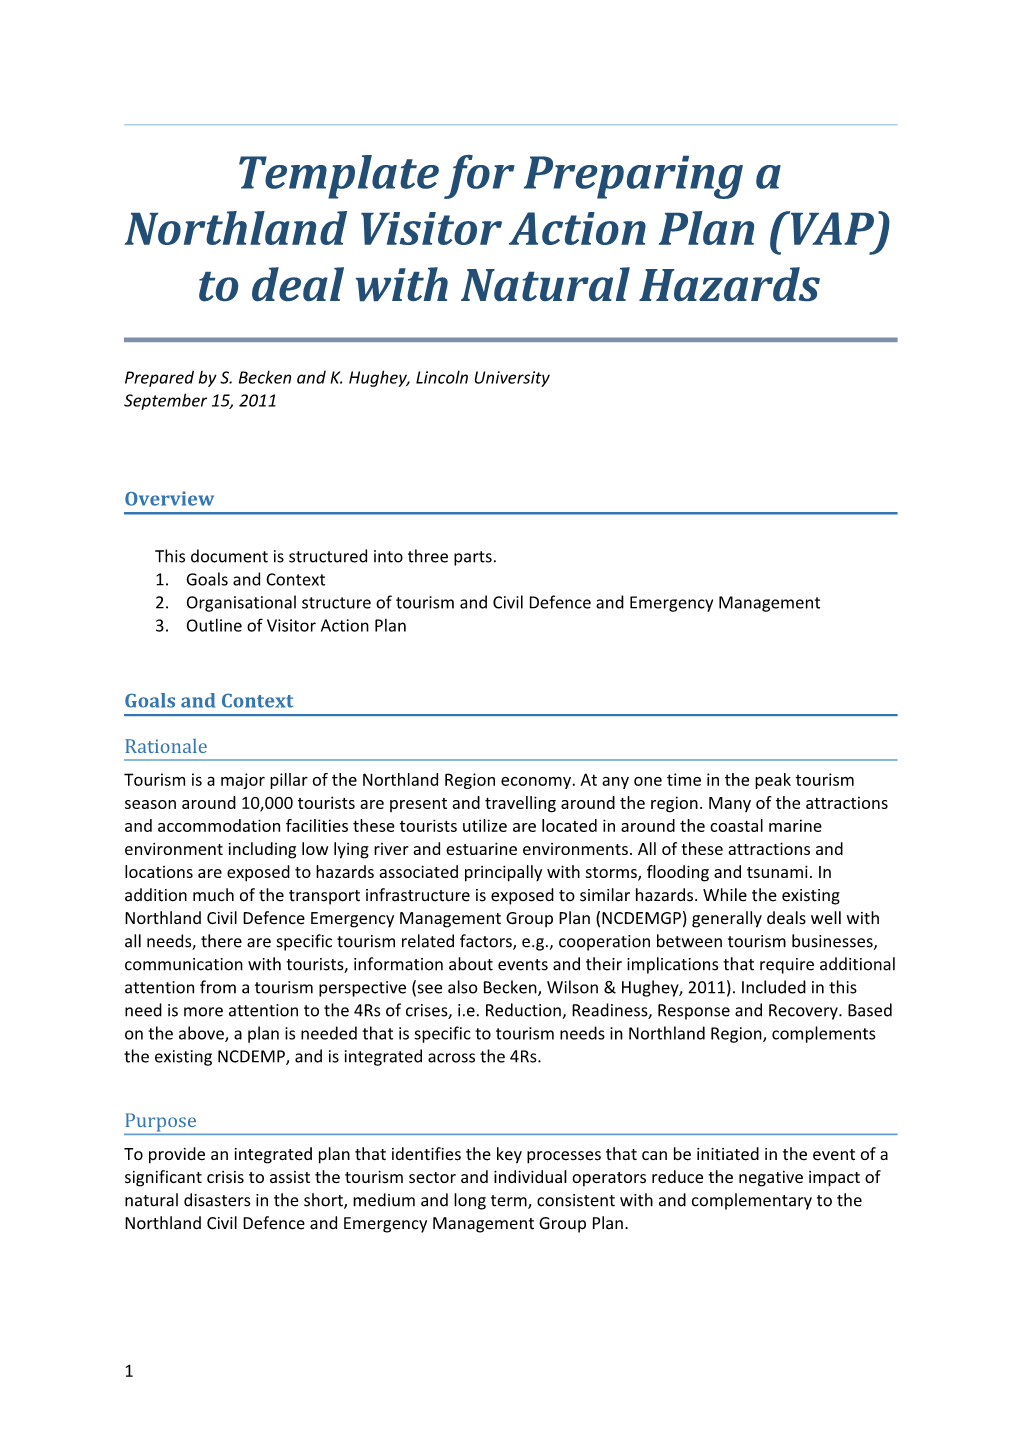 Template for Preparing a Northland Visitoraction Plan(VAP) to Deal with Natural Hazards